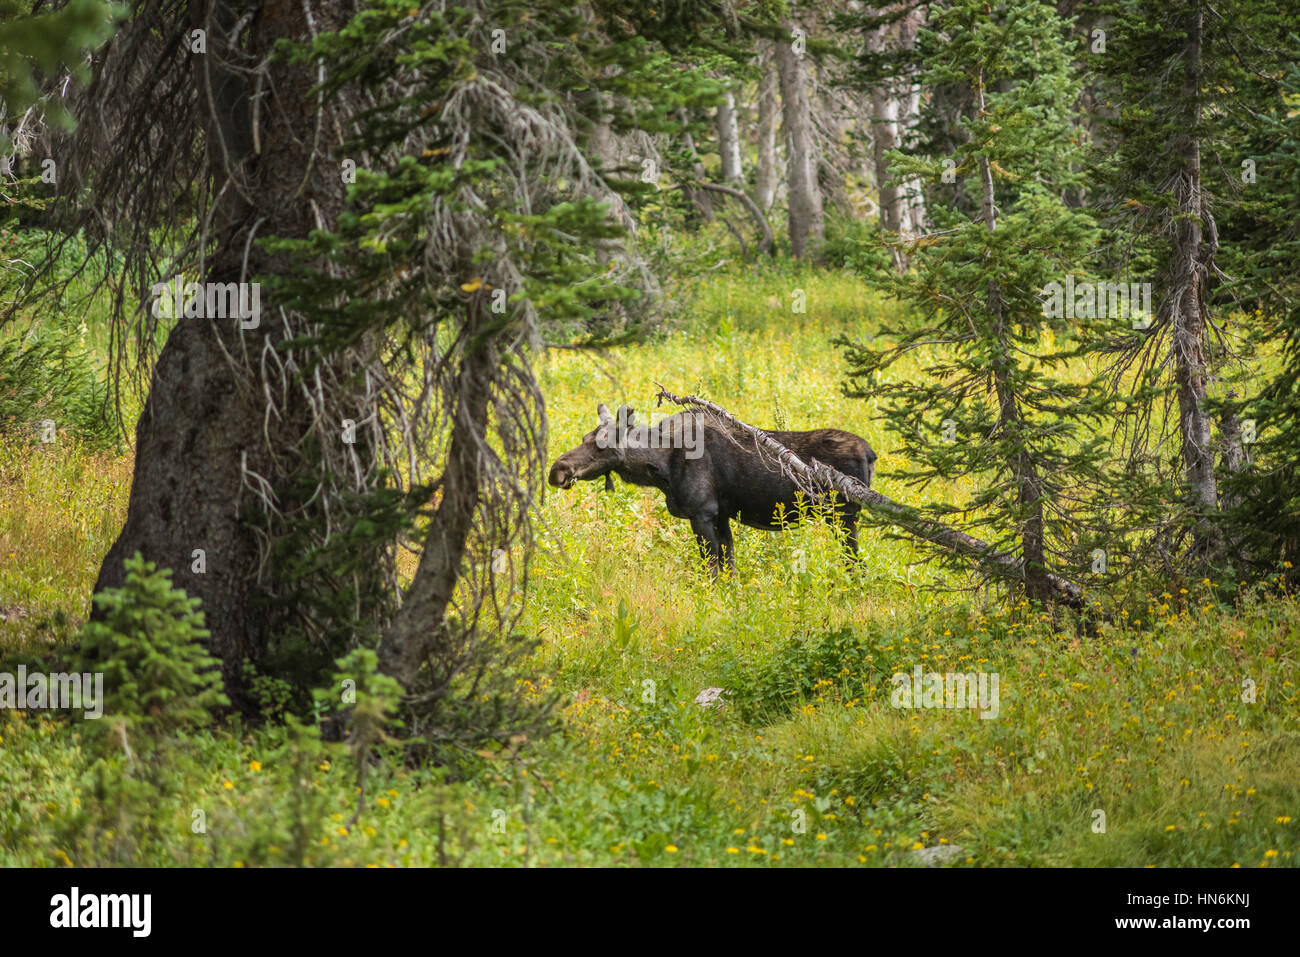 Moose standing by summer yellow wildflowers in a pine tree forest at Albion Basin, Salt Lake City, Utah Stock Photo